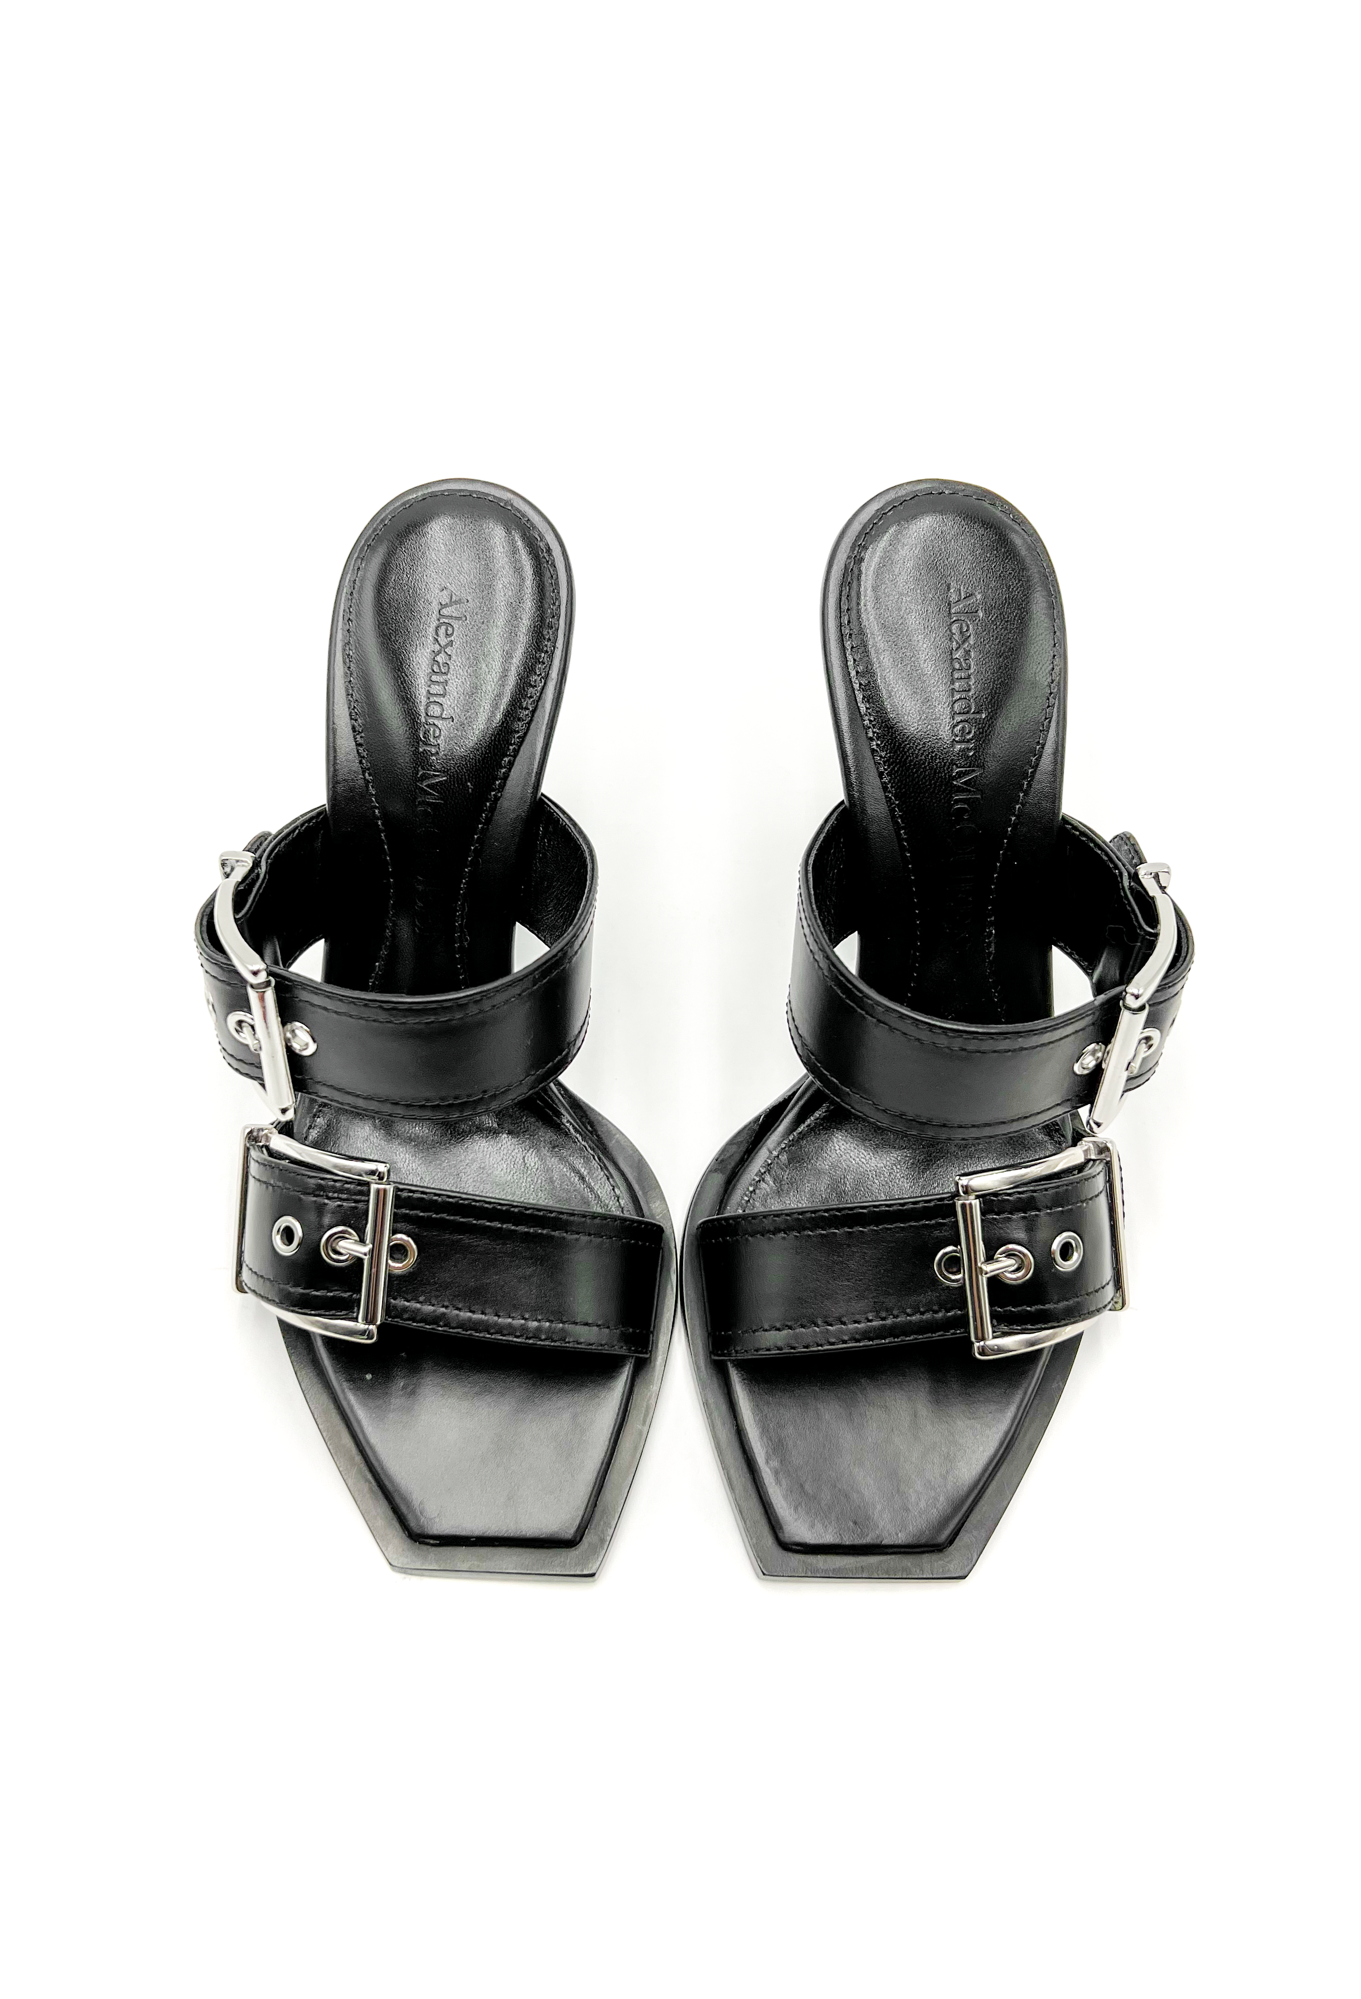 Alexander McQueen Punk Buckled Leather Mules